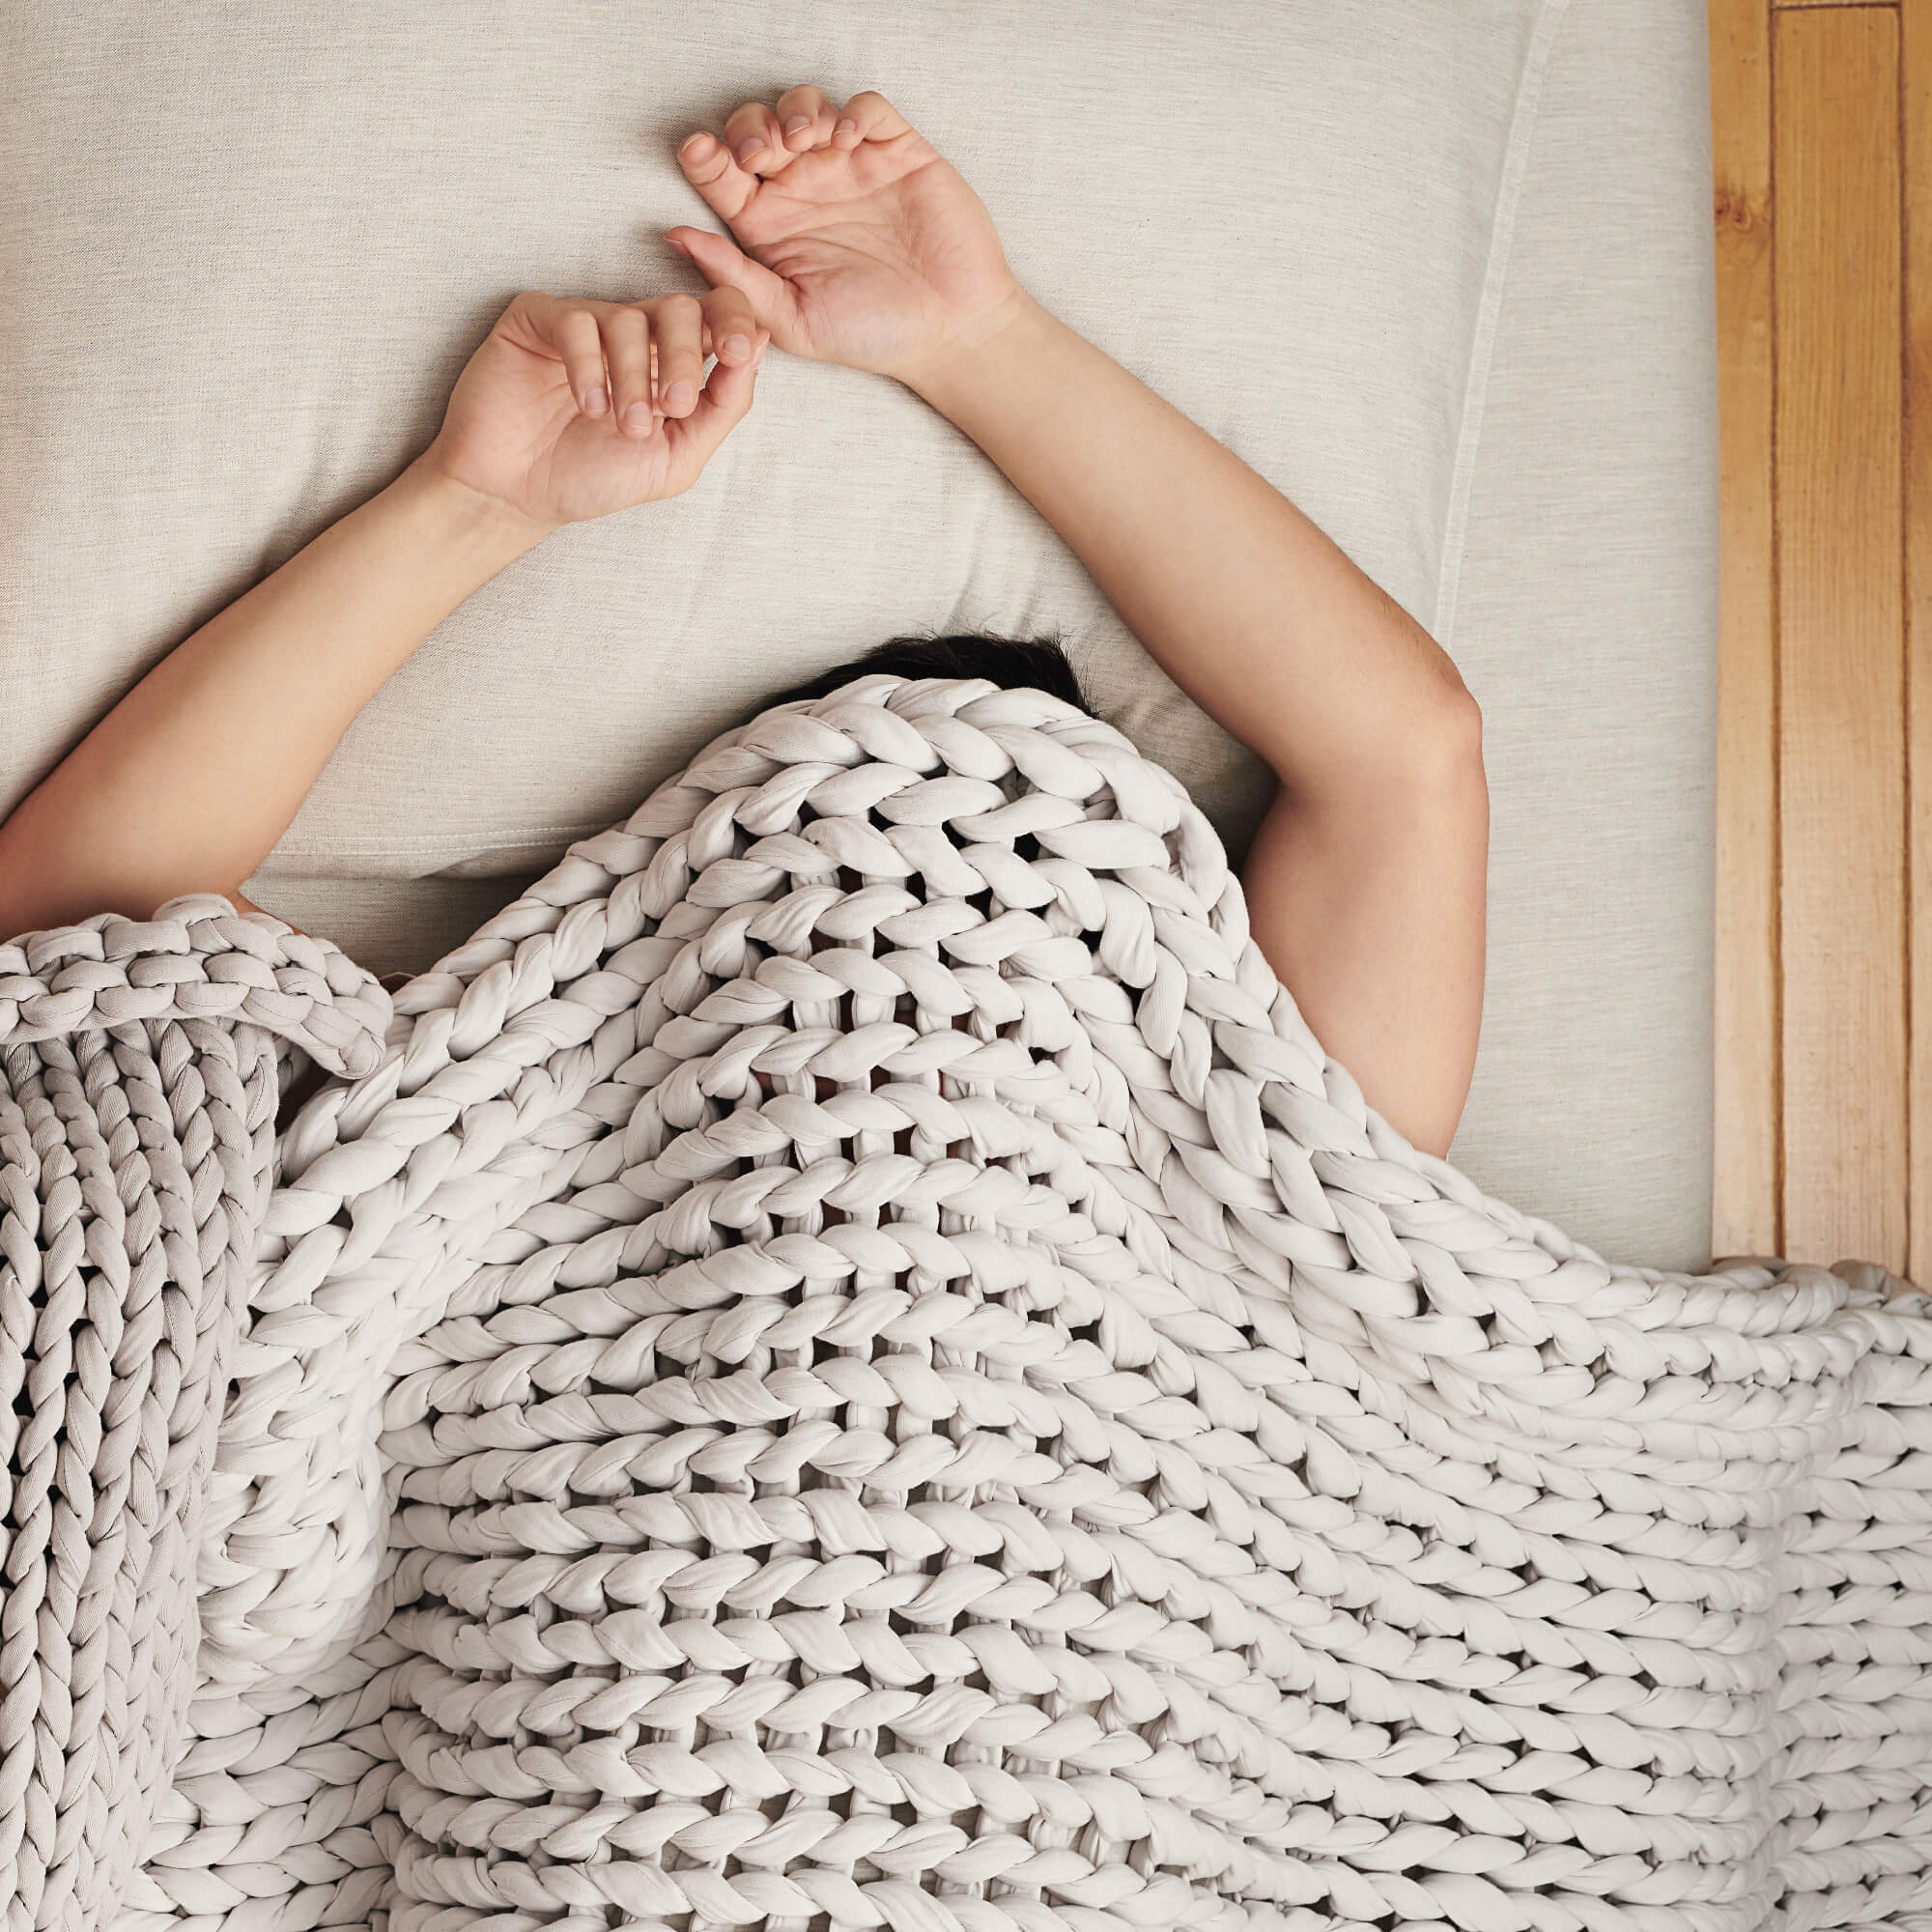 How can weighted blankets help with PTSD?